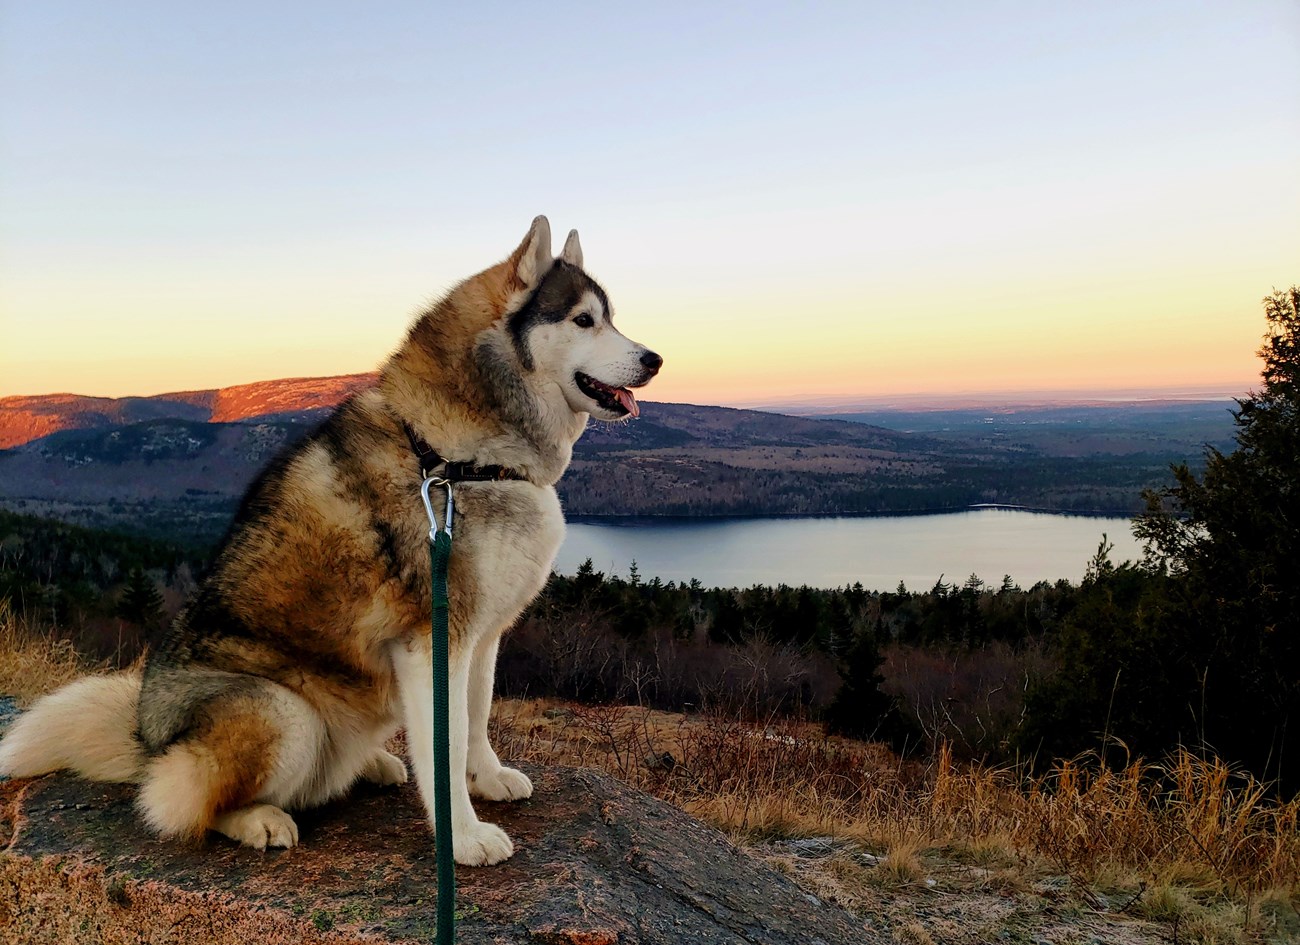 Husky dog in foreground with early morning light on mountain in background